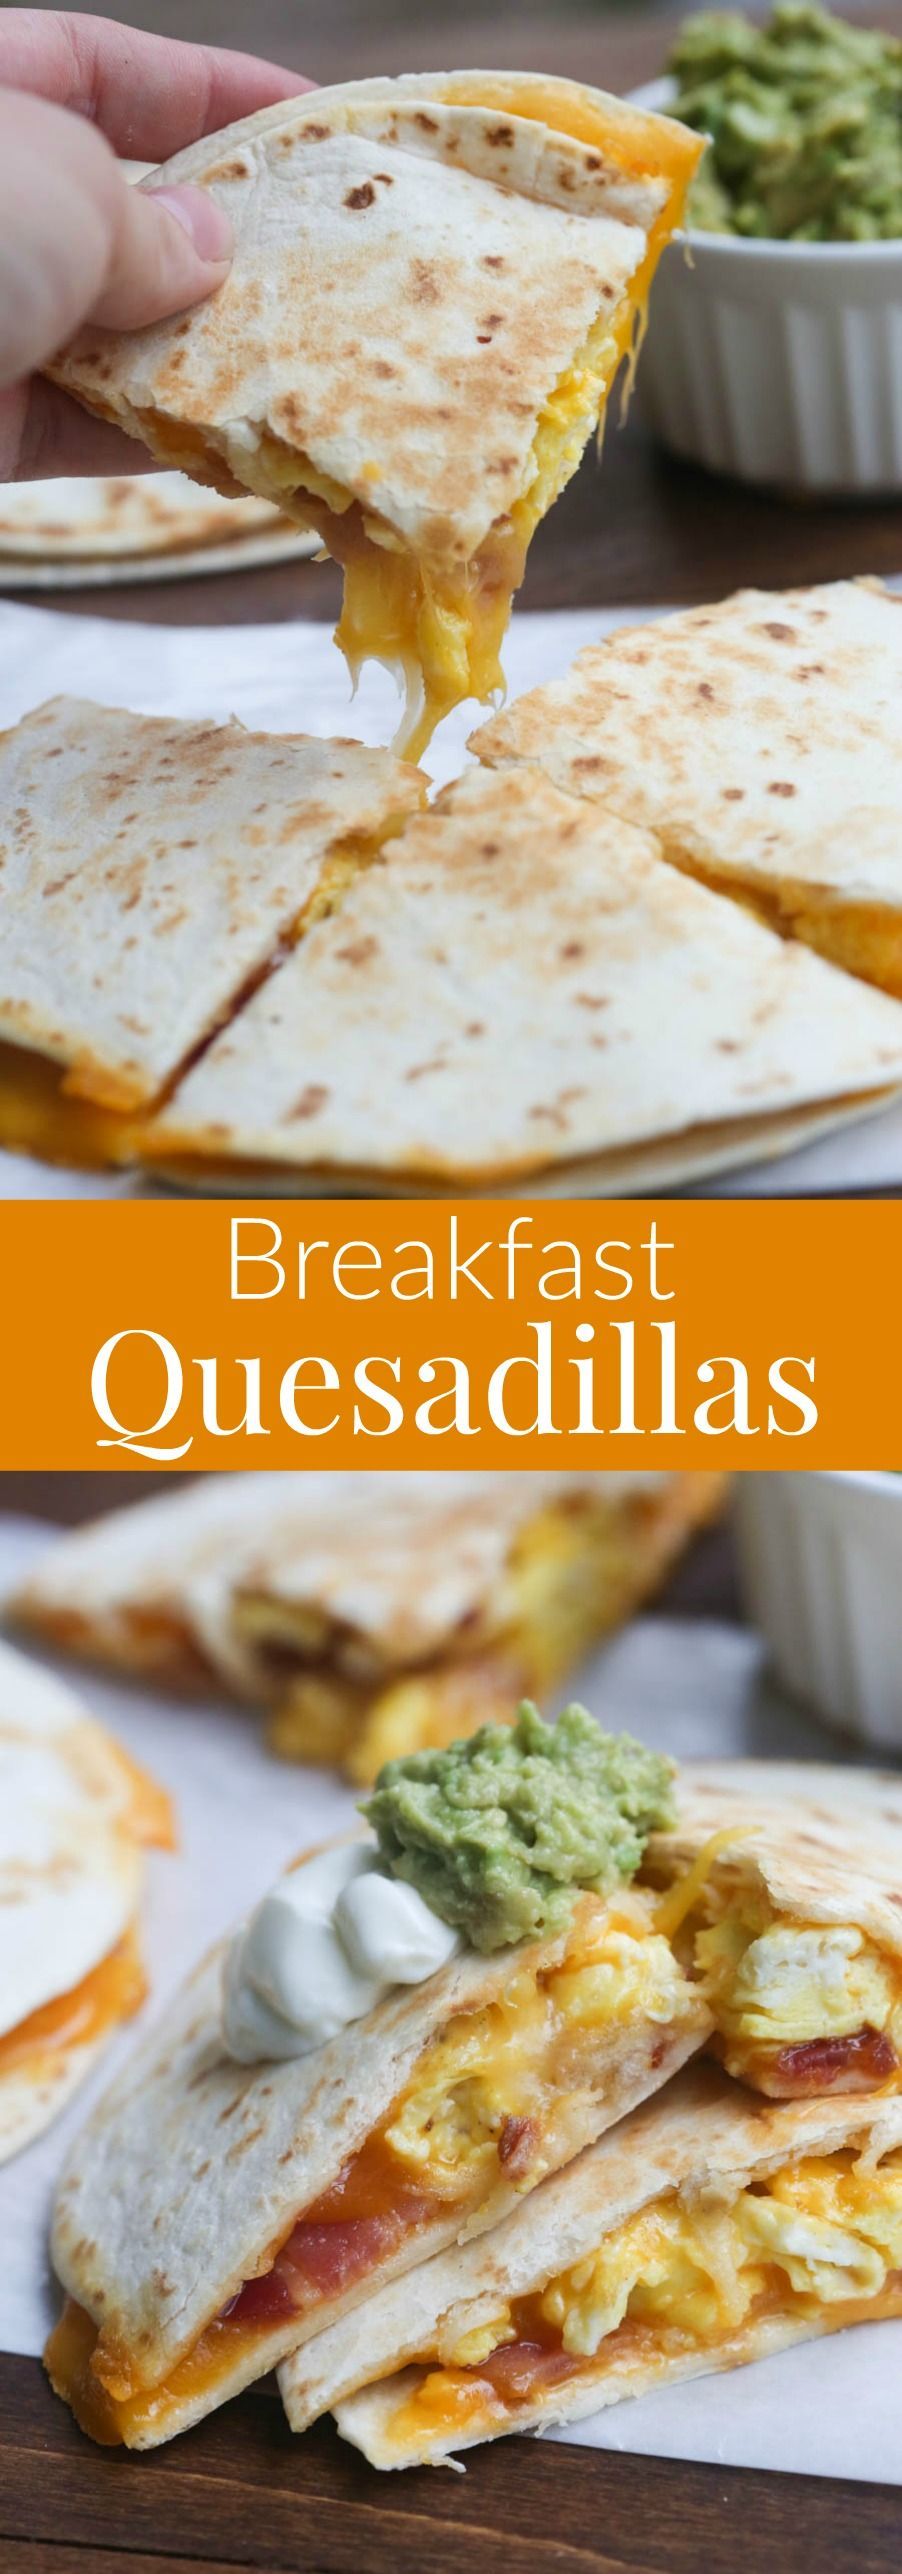 Breakfast Quesadillas with bacon, egg and cheese. An easy breakfast or dinner idea